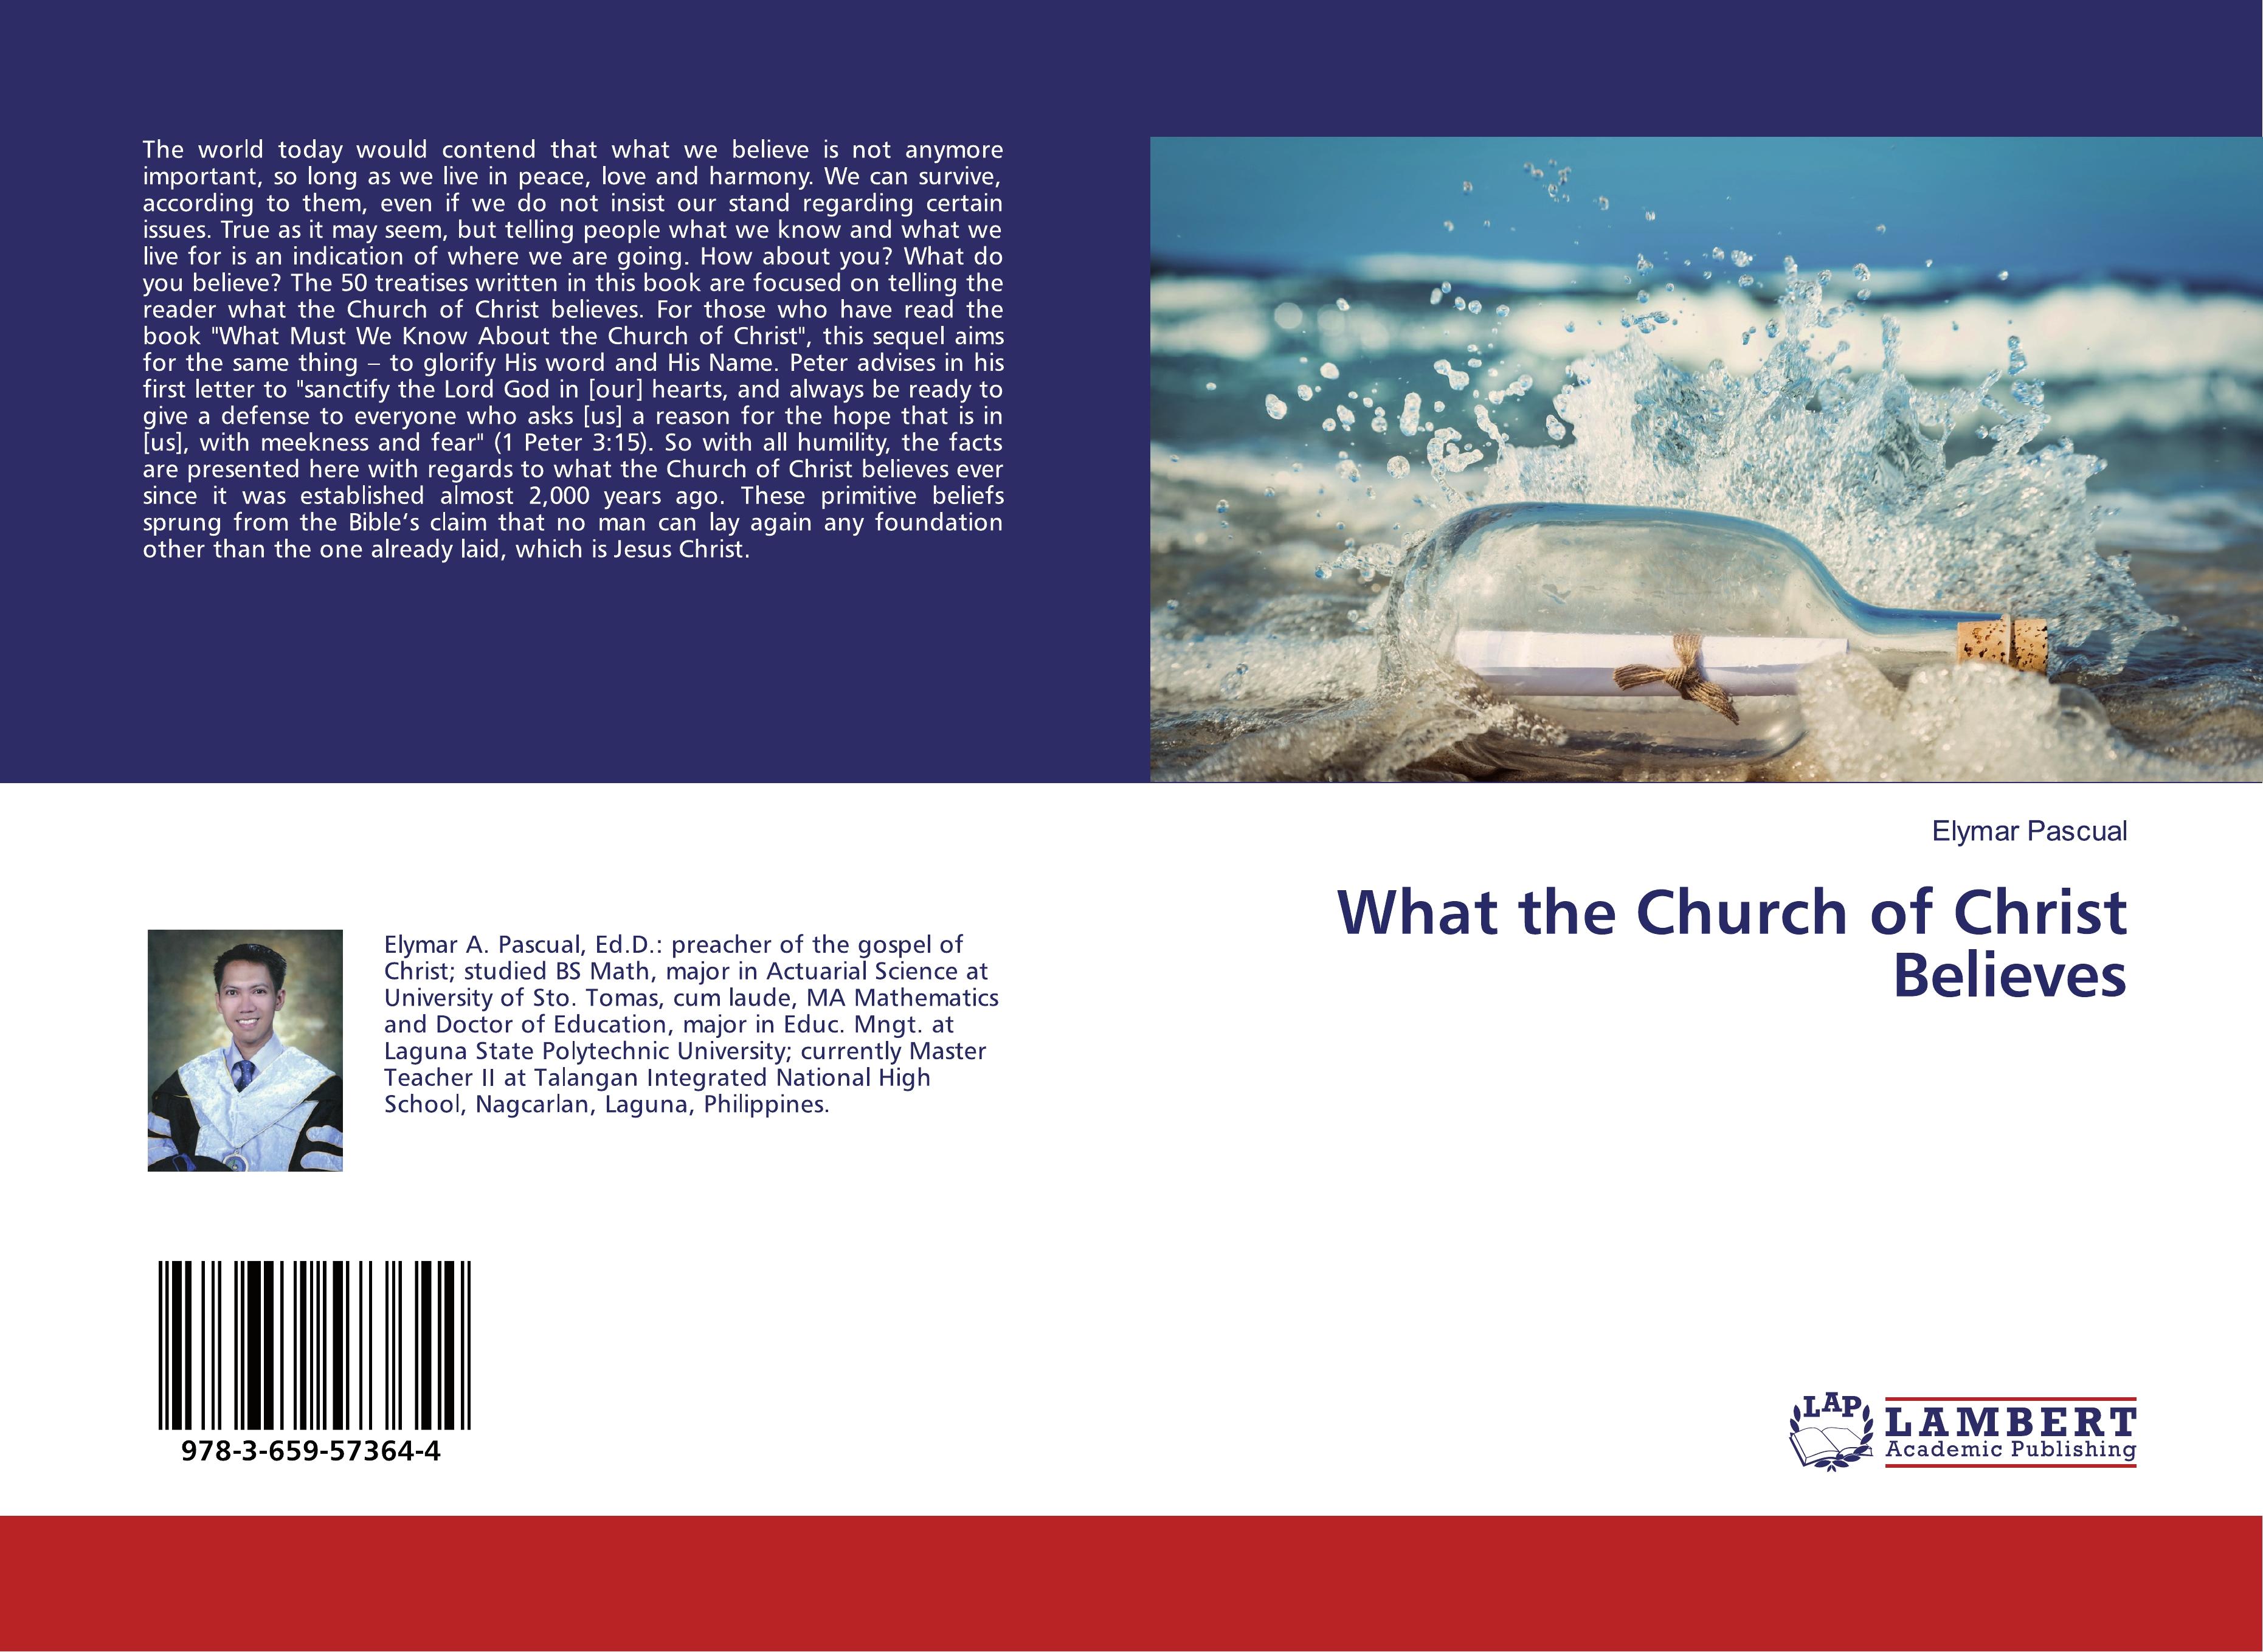 What the Church of Christ Believes | Elymar Pascual | Taschenbuch | Paperback | 84 S. | Englisch | 2019 | LAP LAMBERT Academic Publishing | EAN 9783659573644 - Pascual, Elymar